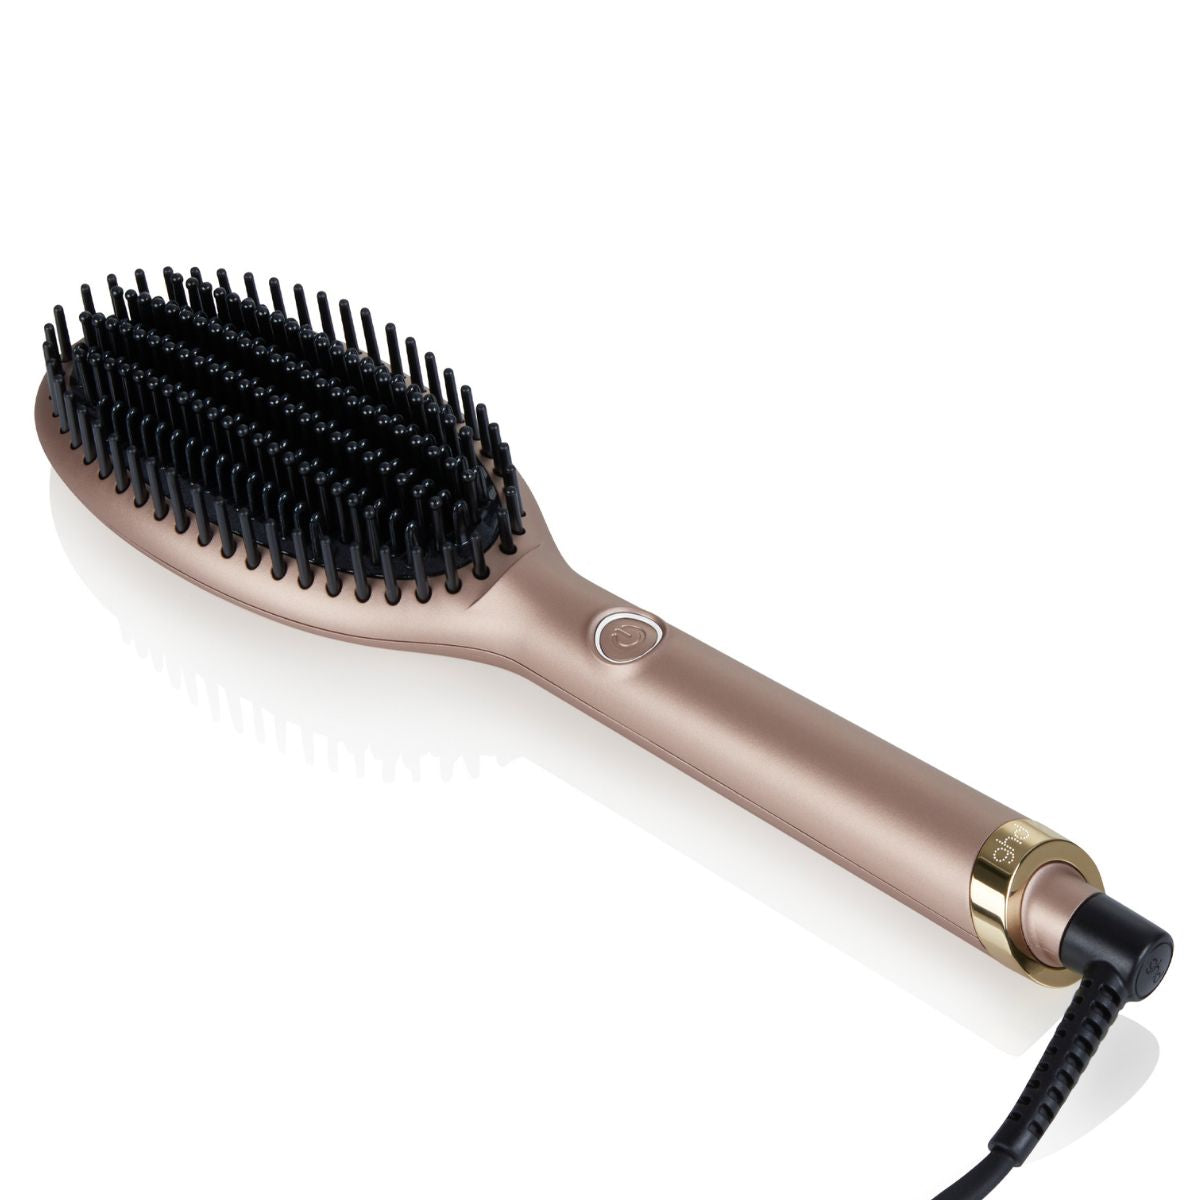 Ghd Glide Hot Brush Limited Edition in Sun-kissed Bronze